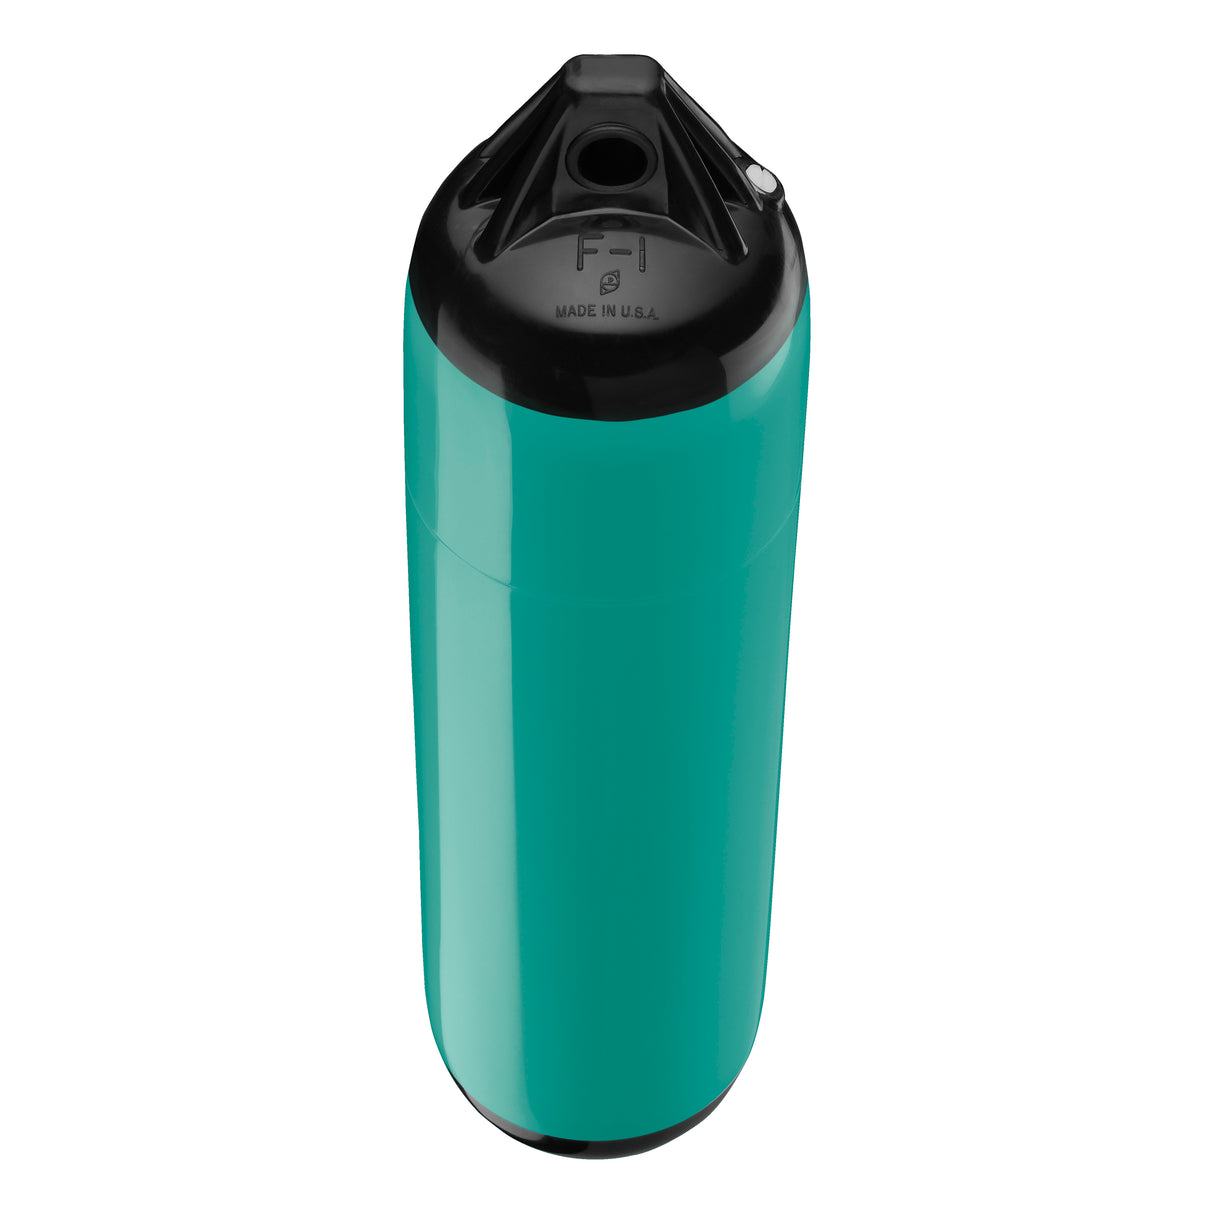 Teal boat fender with Black-Top, Polyform F-1 angled shot